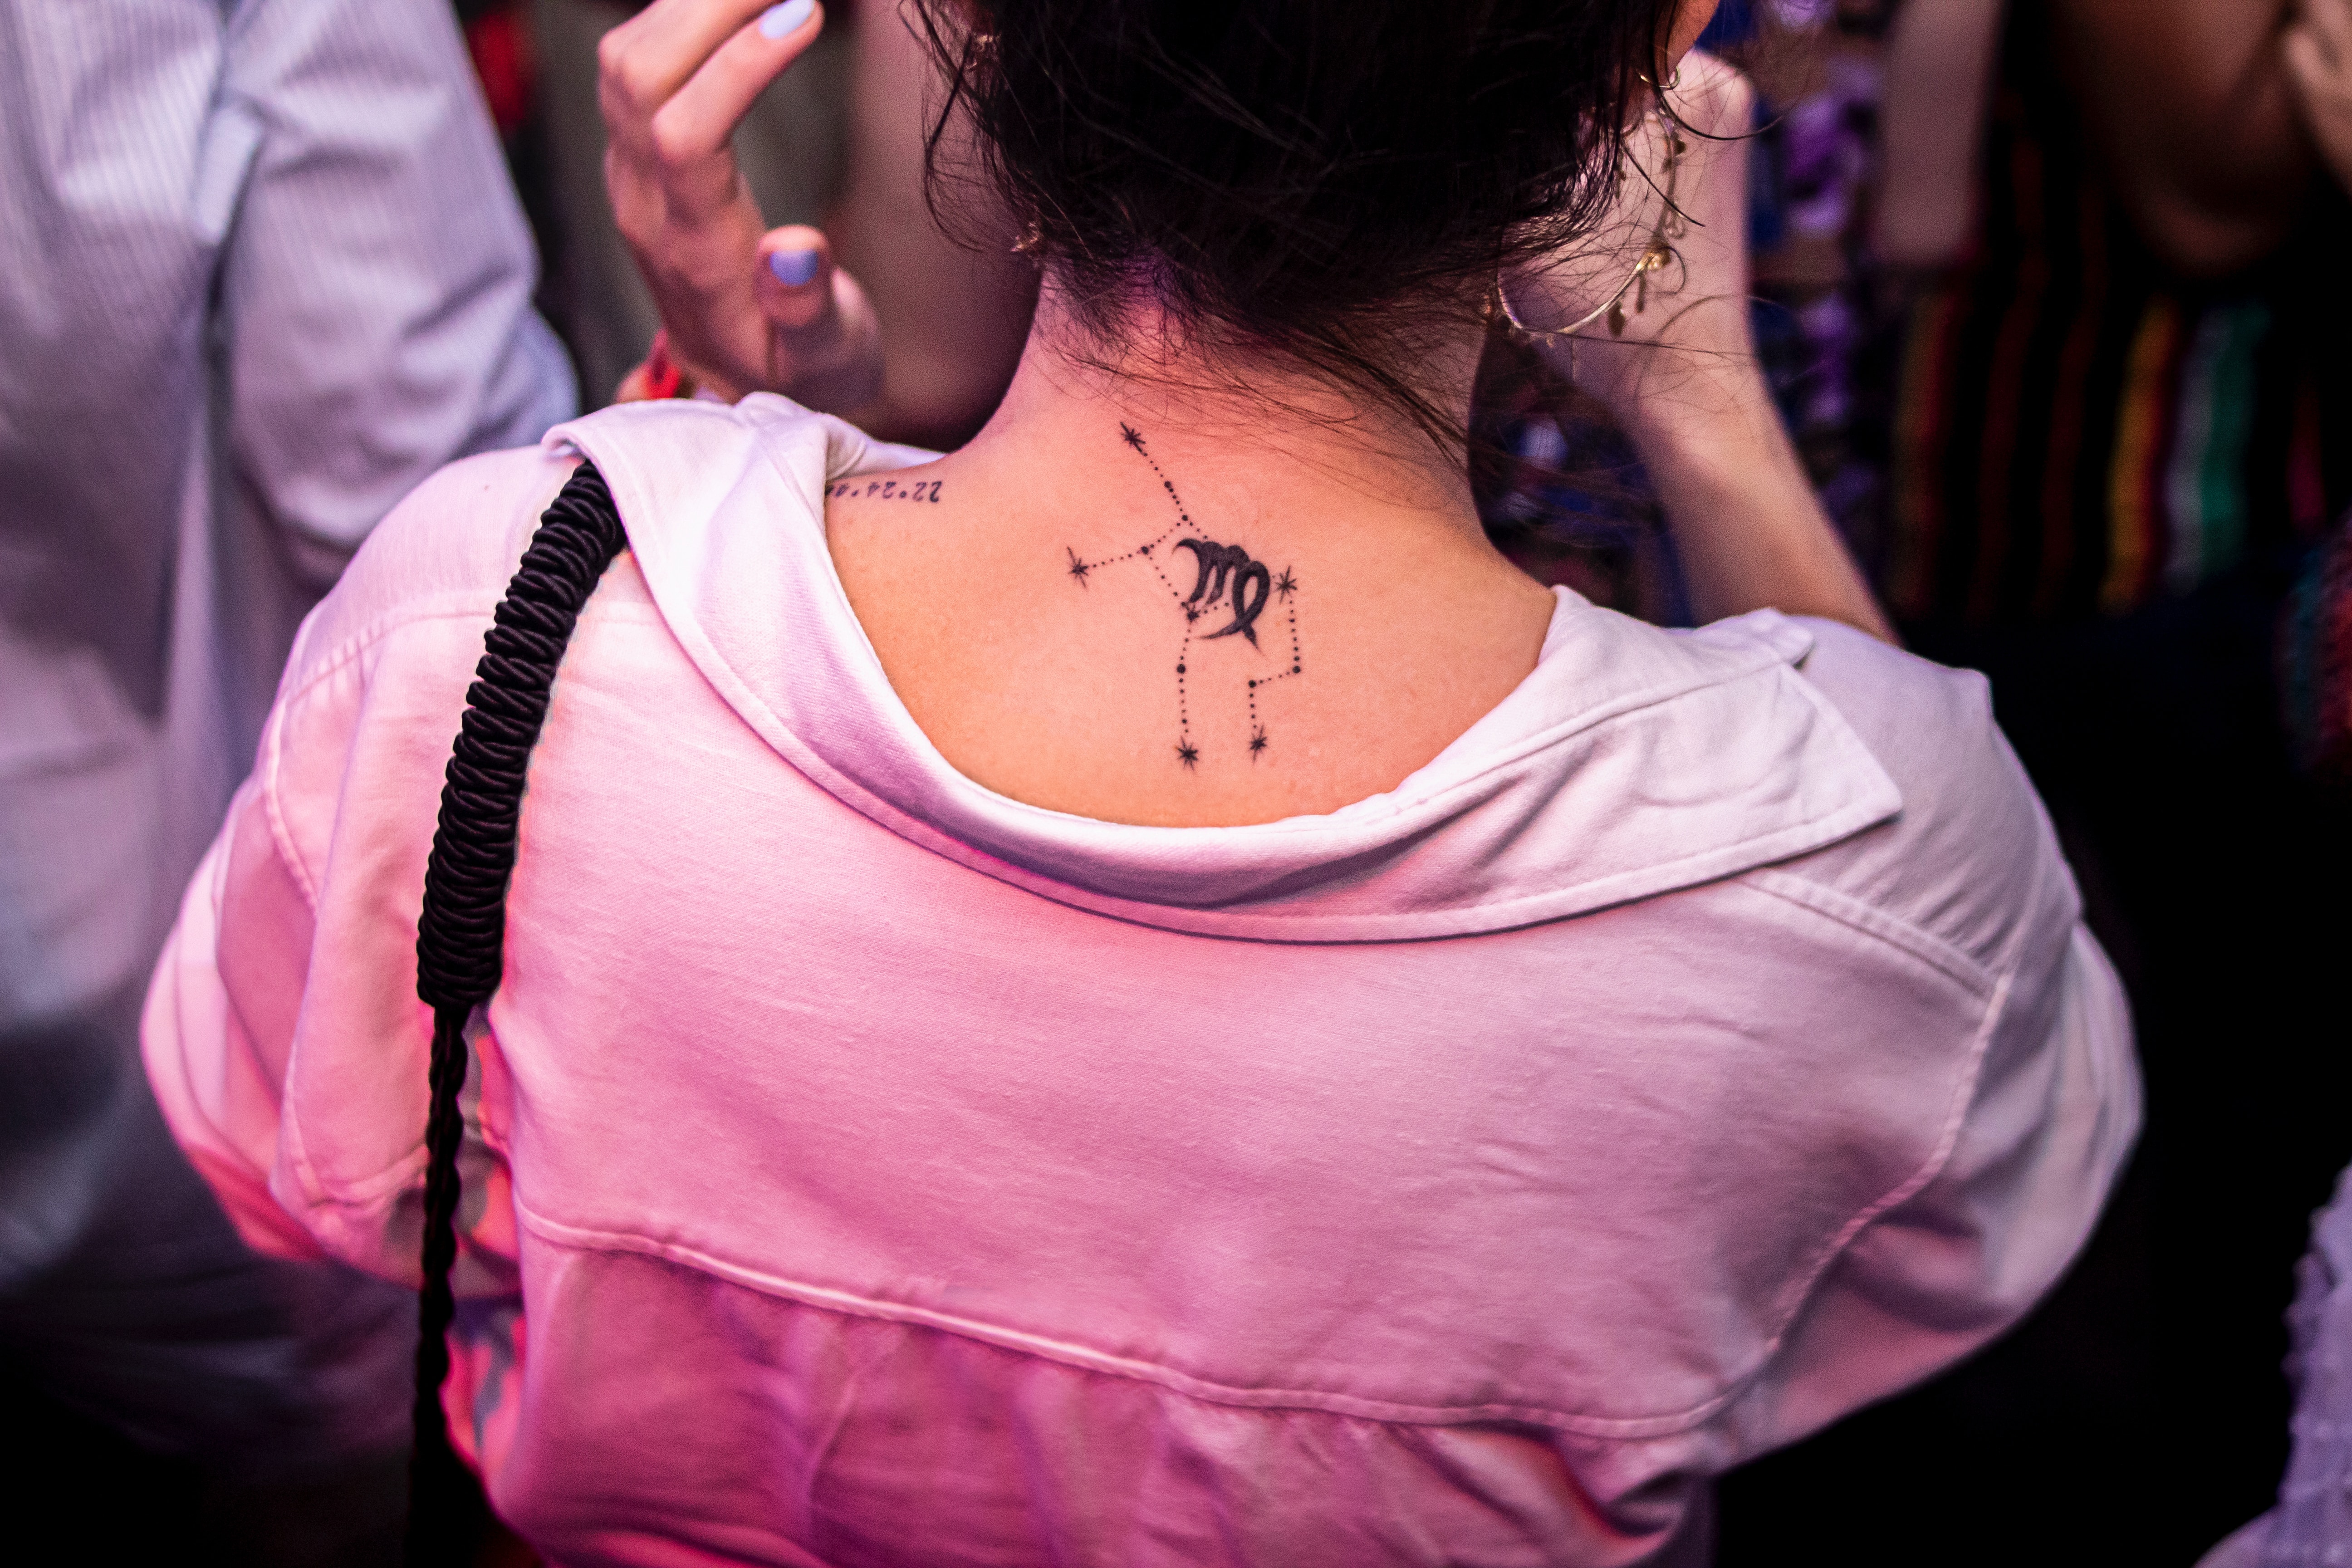 A woman with a Virgo sign on her back. | Source: Unsplash